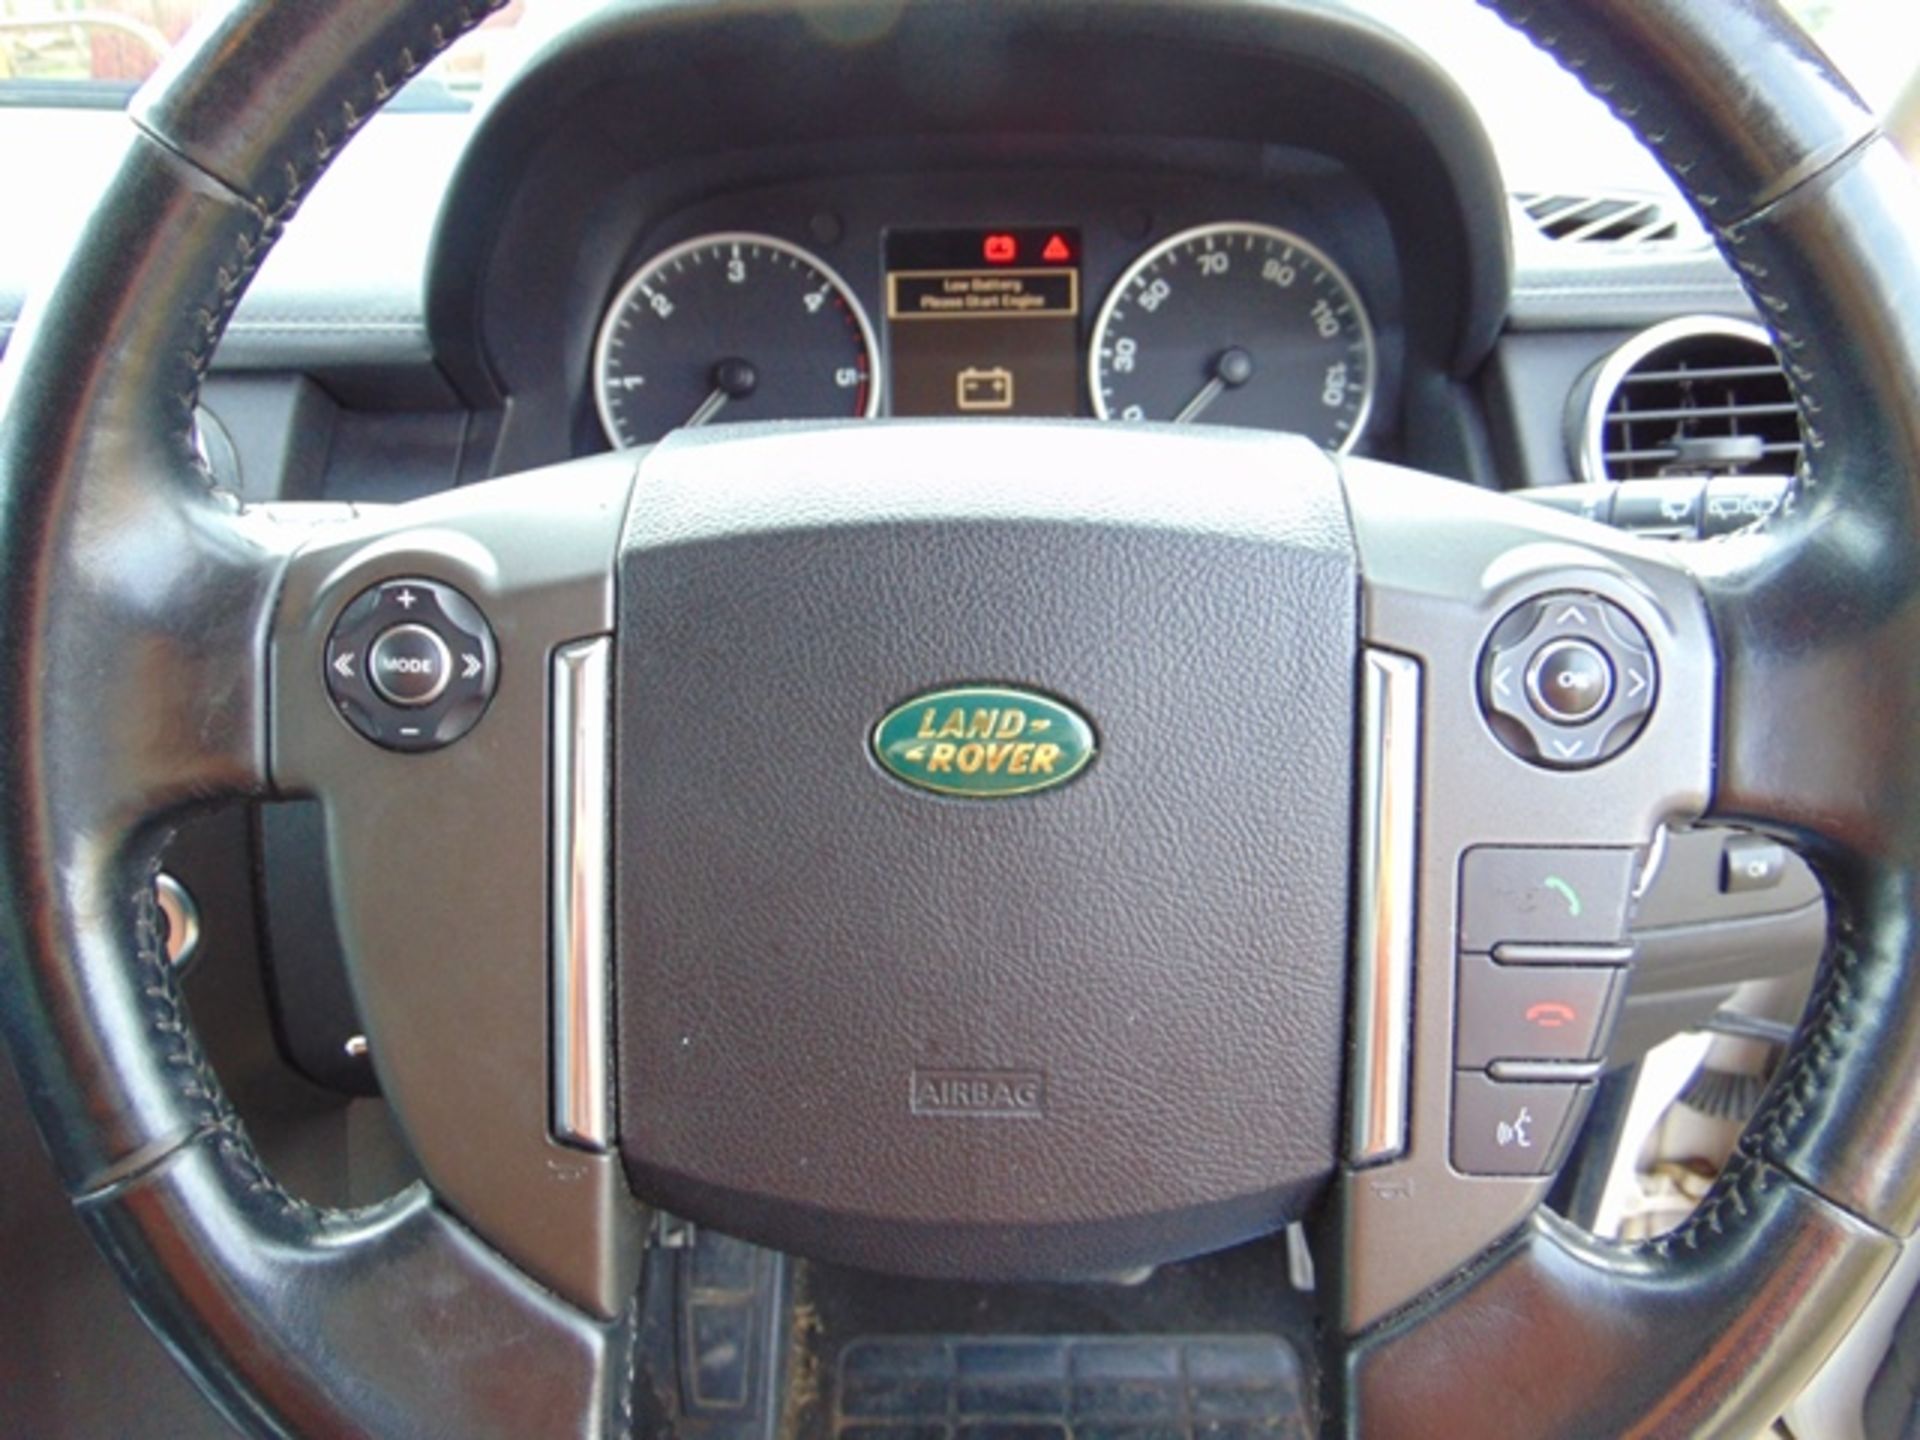 2010 Land Rover Discovery 4 3.0 TDV6 GS - Image 12 of 21